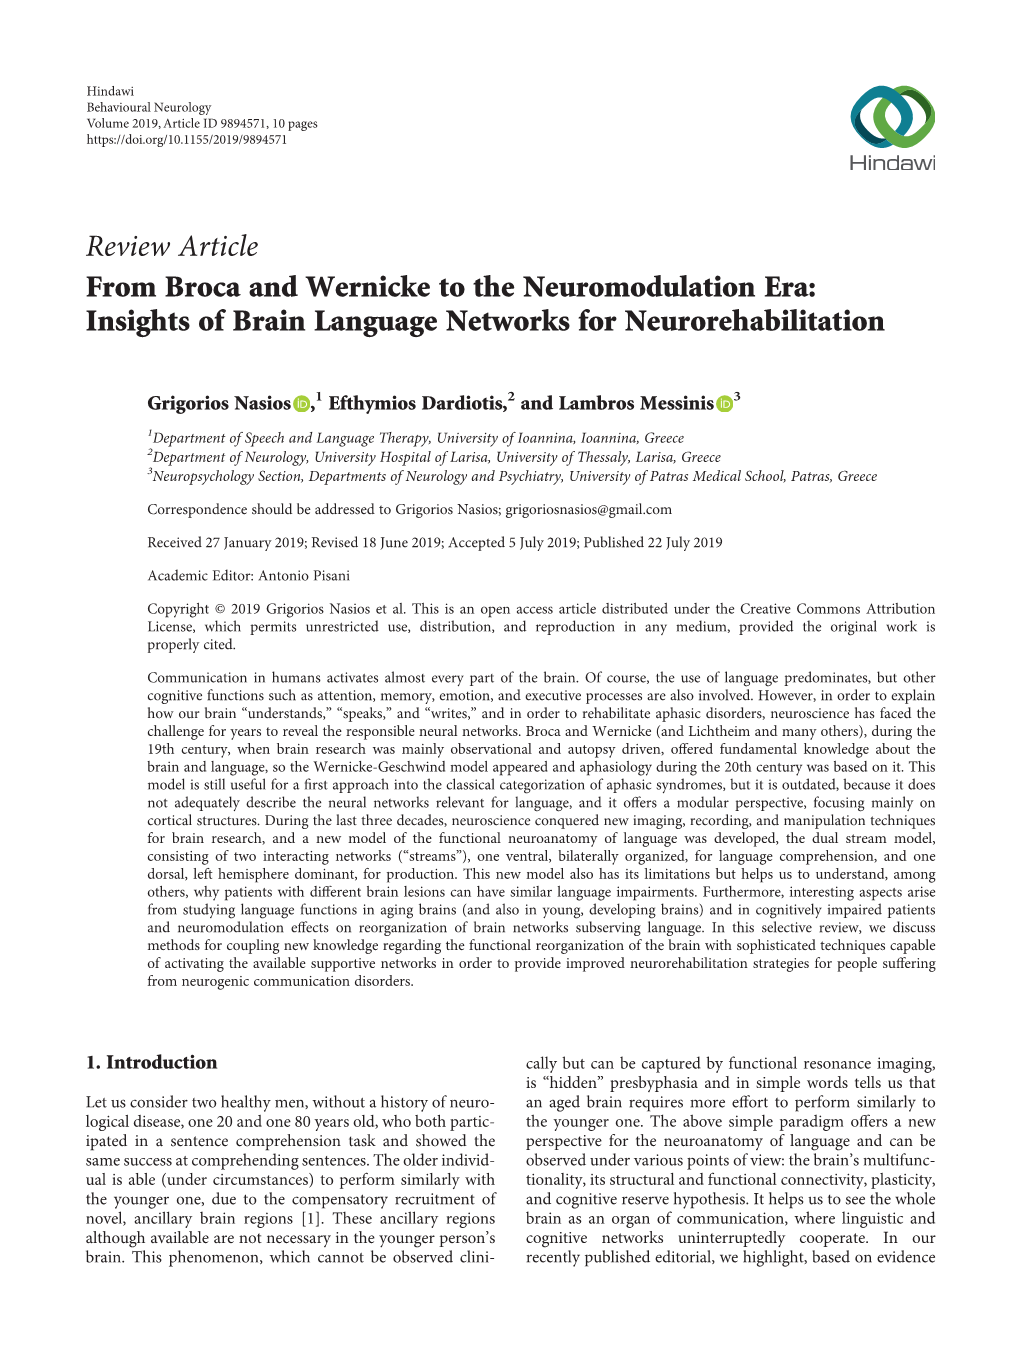 From Broca and Wernicke to the Neuromodulation Era: Insights of Brain Language Networks for Neurorehabilitation